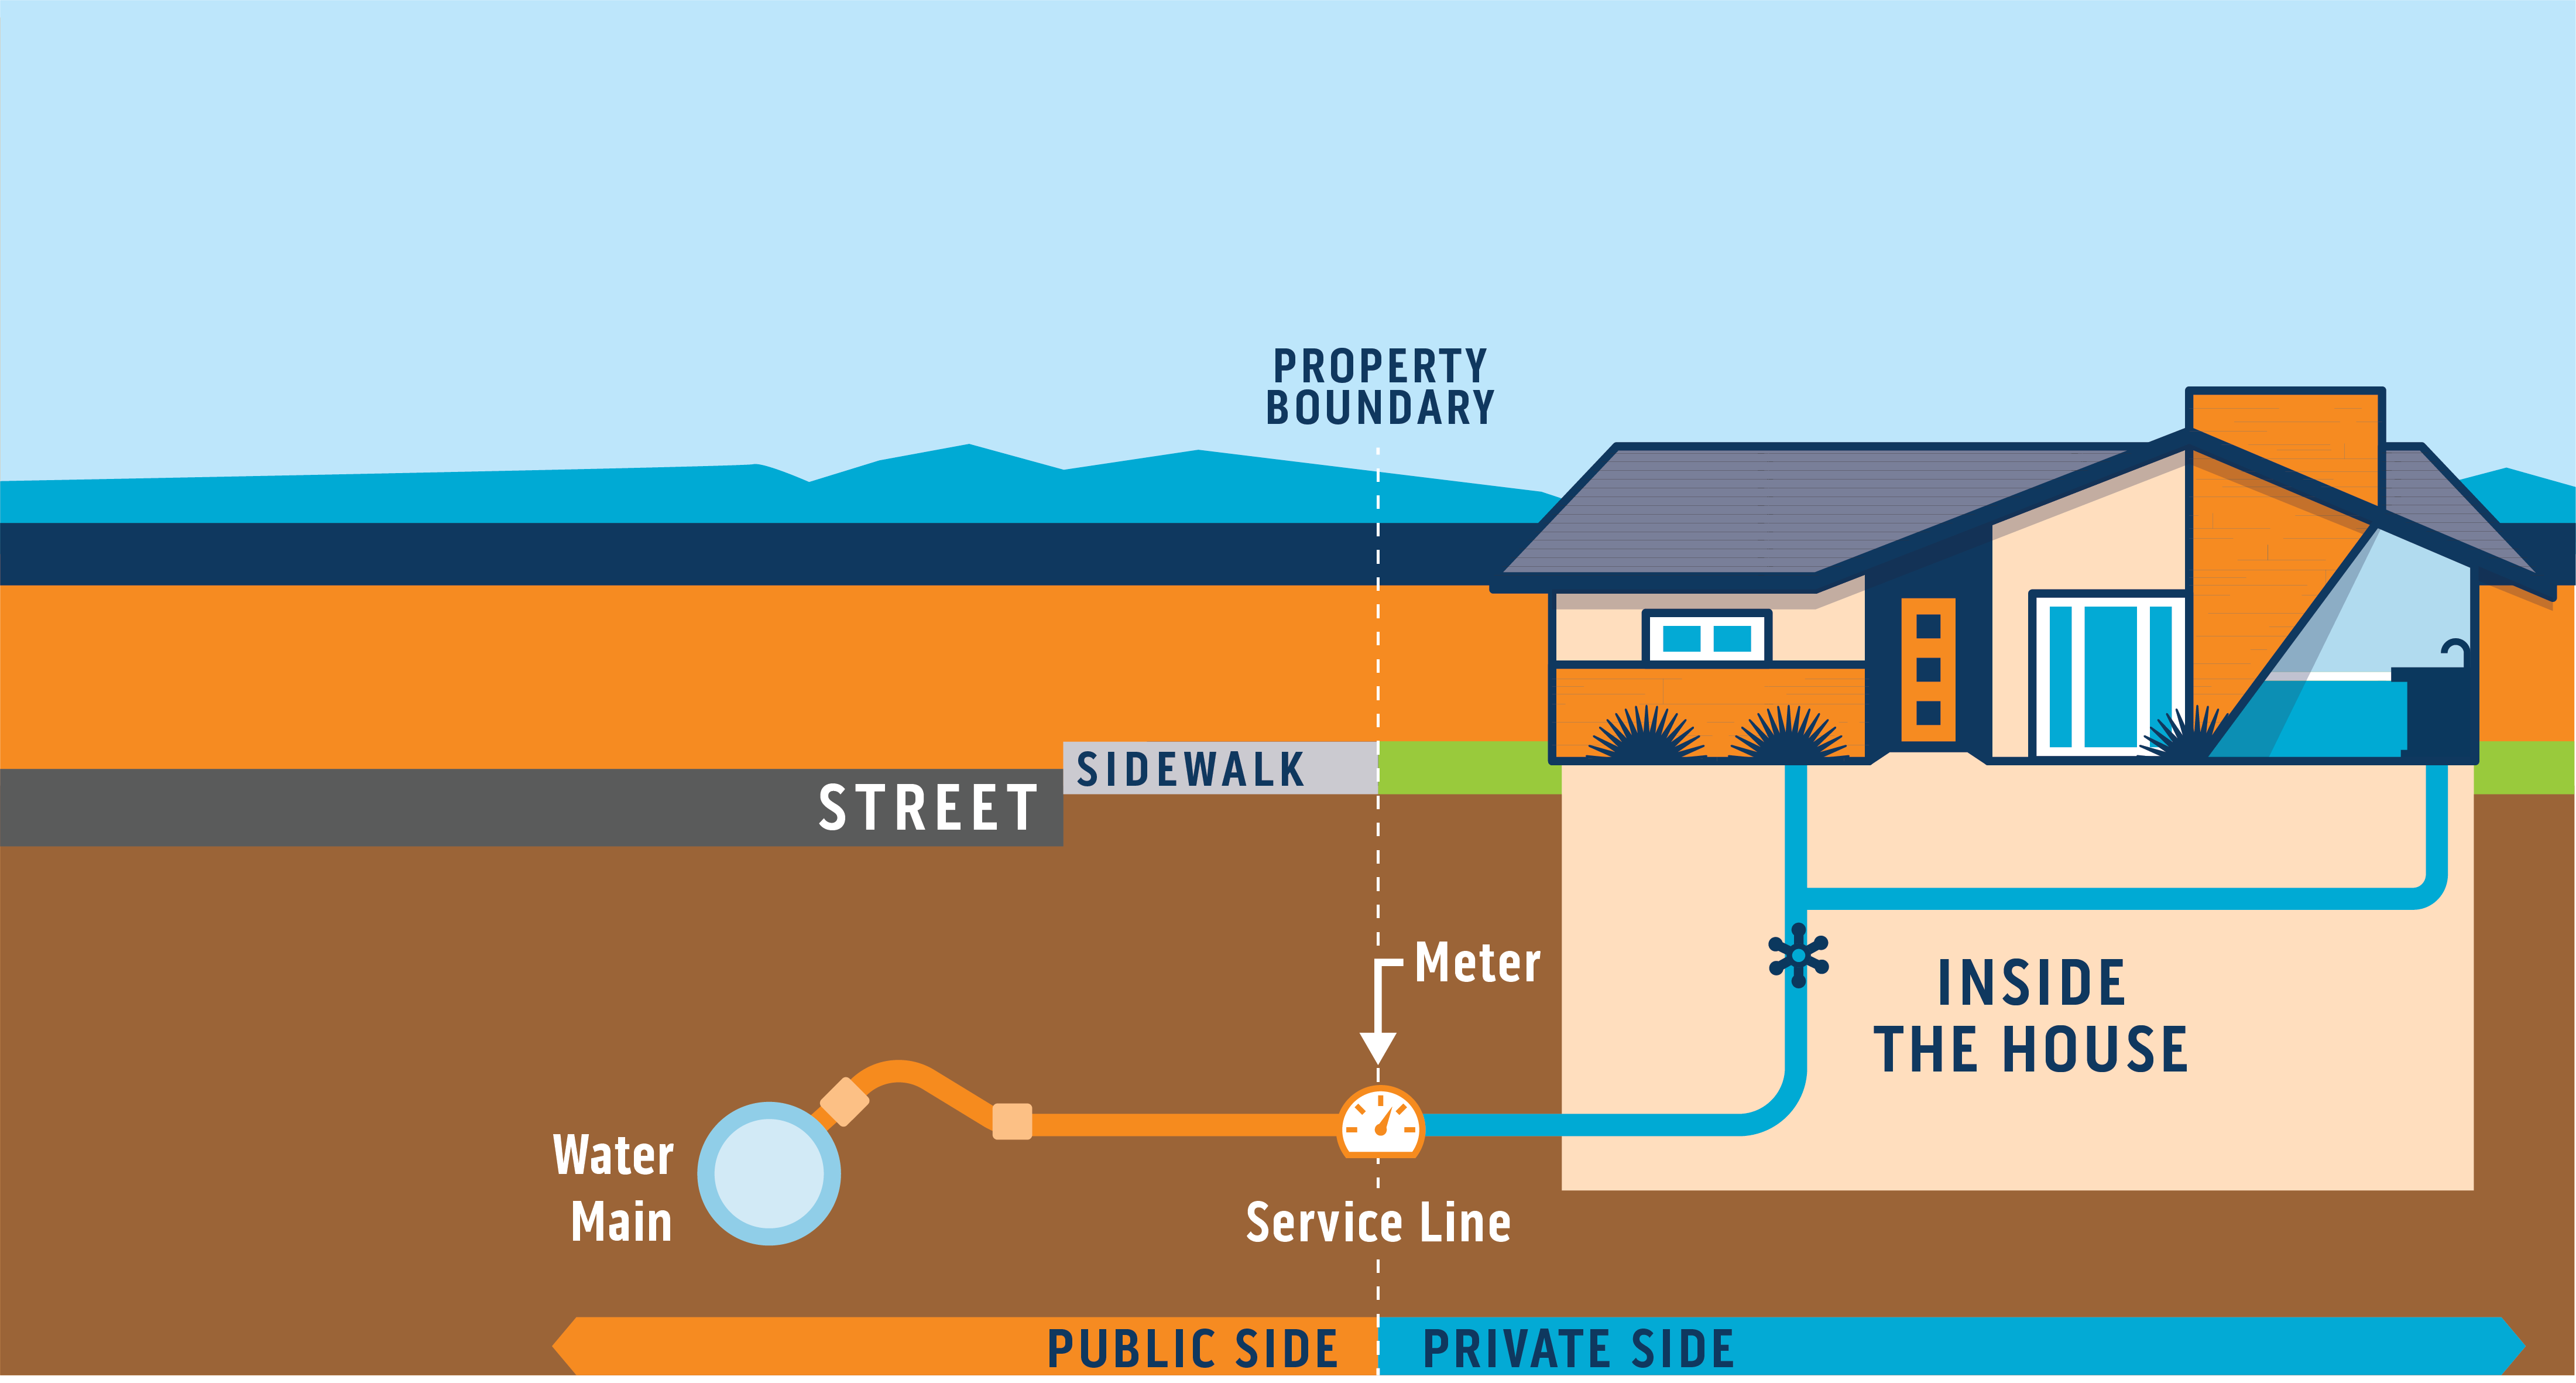 Service line diagram showing its path from the water main to the house. This includes private and publics sides of the service line.